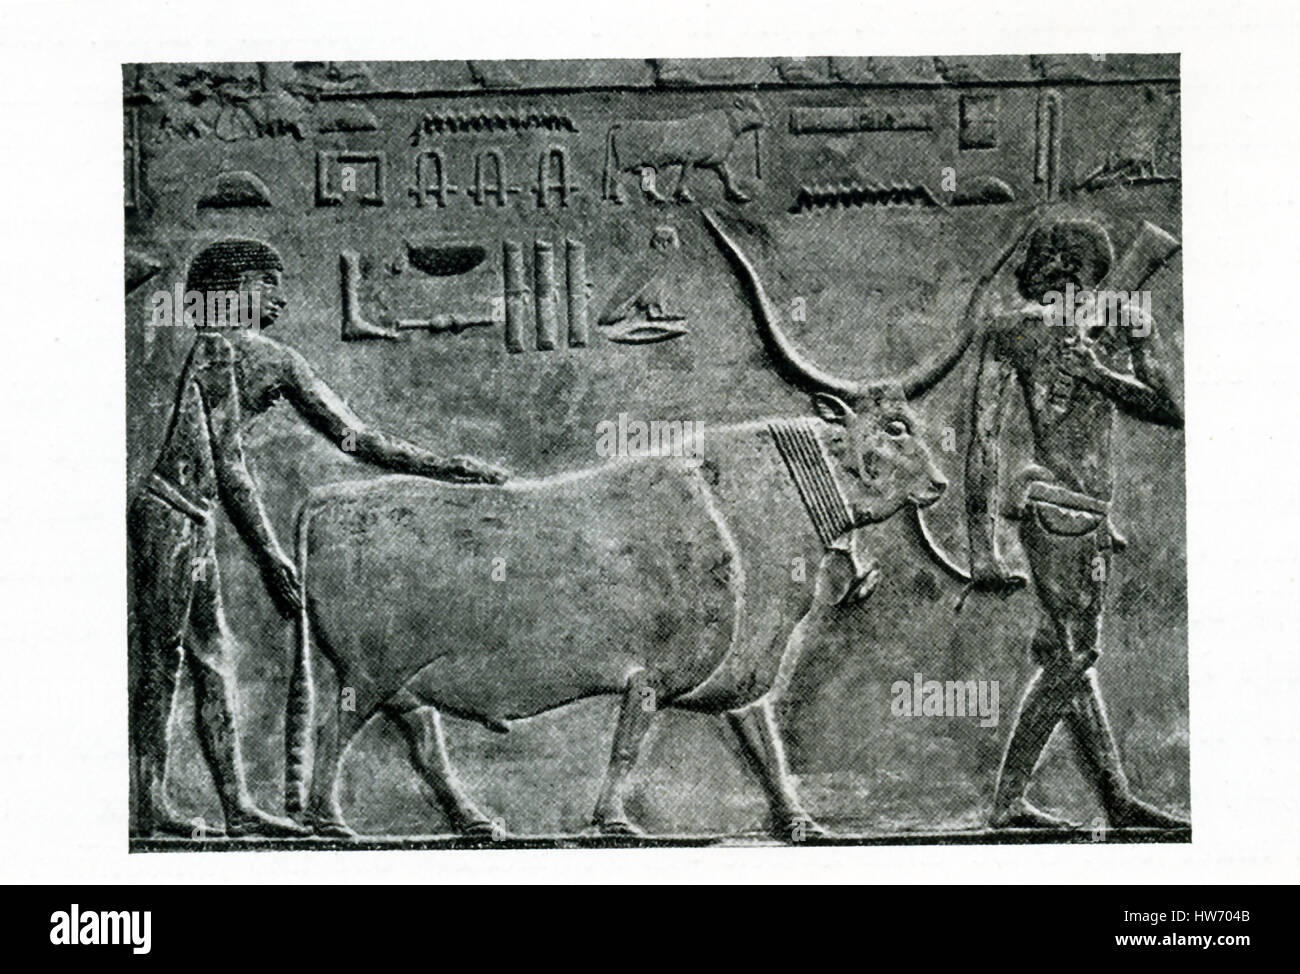 This carved relief shows a farmer bringing in a steer. It is from  the Old Kingdom tomb of Princess Idut at Saqqara. Saqqara served as a huge burial ground  in ancient Egypt and was the cemetery for the ancient Egyptian capital of Memphis. Djoser’s Step Pyramid is also here. Idut (also known as Seshsehset) is thought to be the daughter of the Unas, a king of the Fifth Dynasty (c. 2494-2345 B.C.) The image is credited to Belgium art historian Jean Capart (1877-1947)  and Emil Roemmler (died 1941). Stock Photo